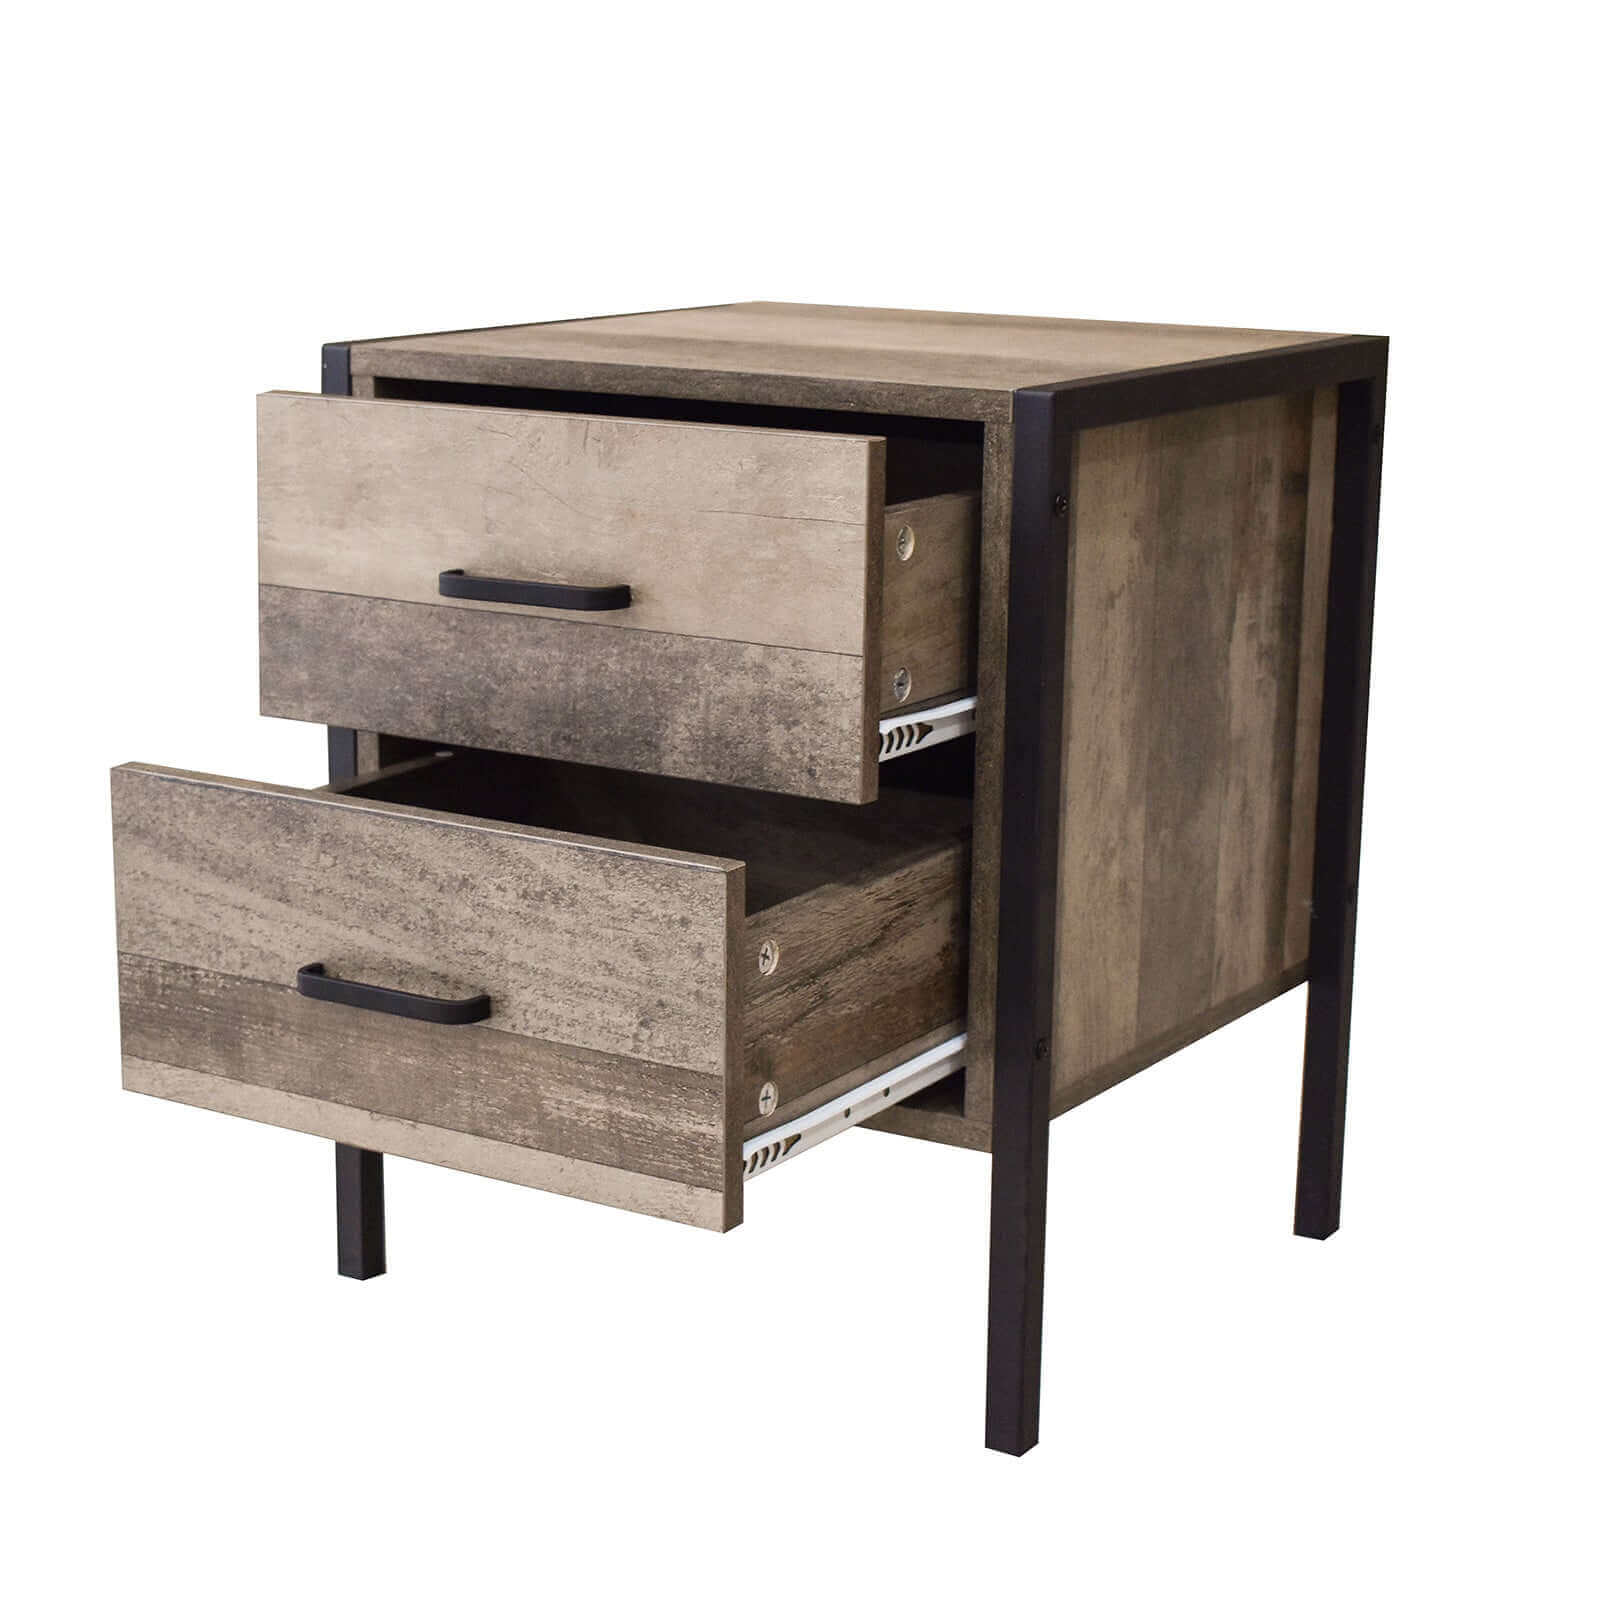 Milano Decor Bedside Table Palm Beach Drawers Nightstand Unit Cabinet Storage-Upinteriors